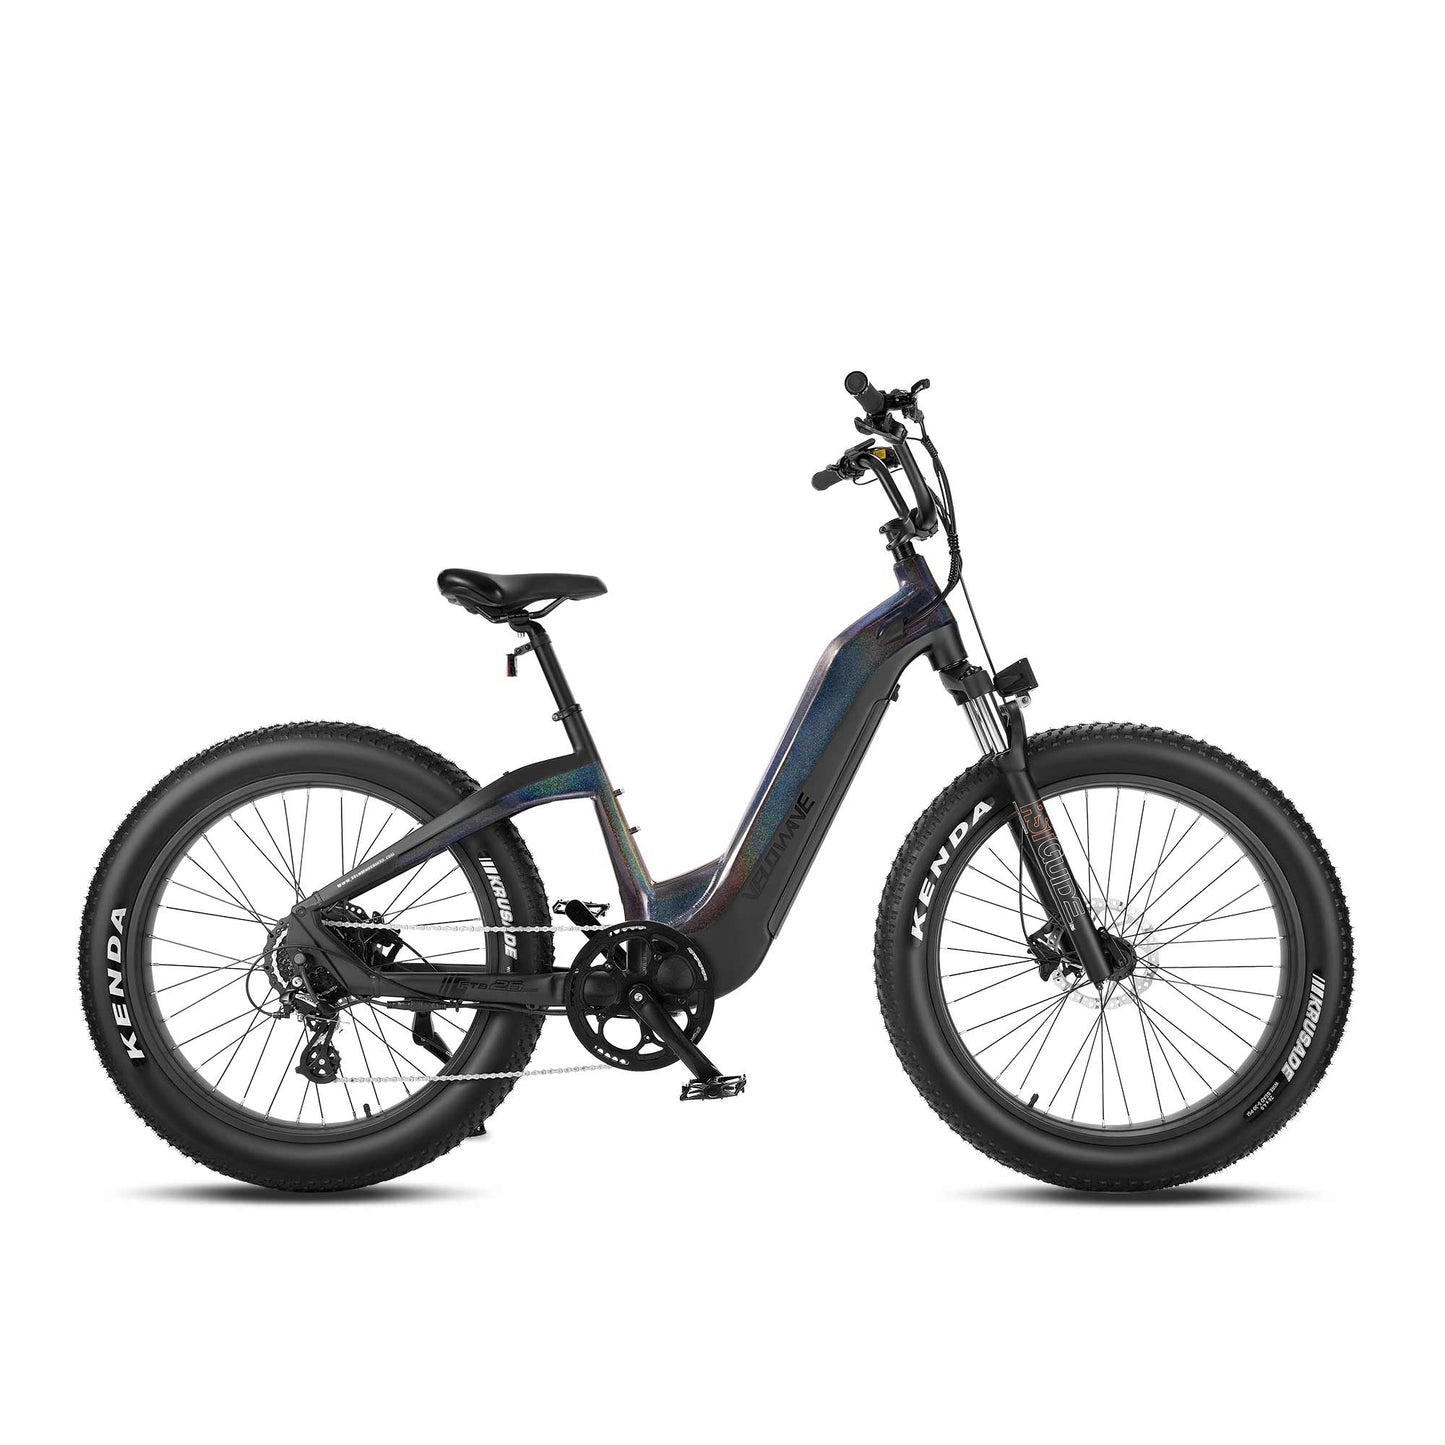 Velowave Grace Step Thru Electric Bike - All Terrain Fat Tire 750W Motor with Suspension Fork